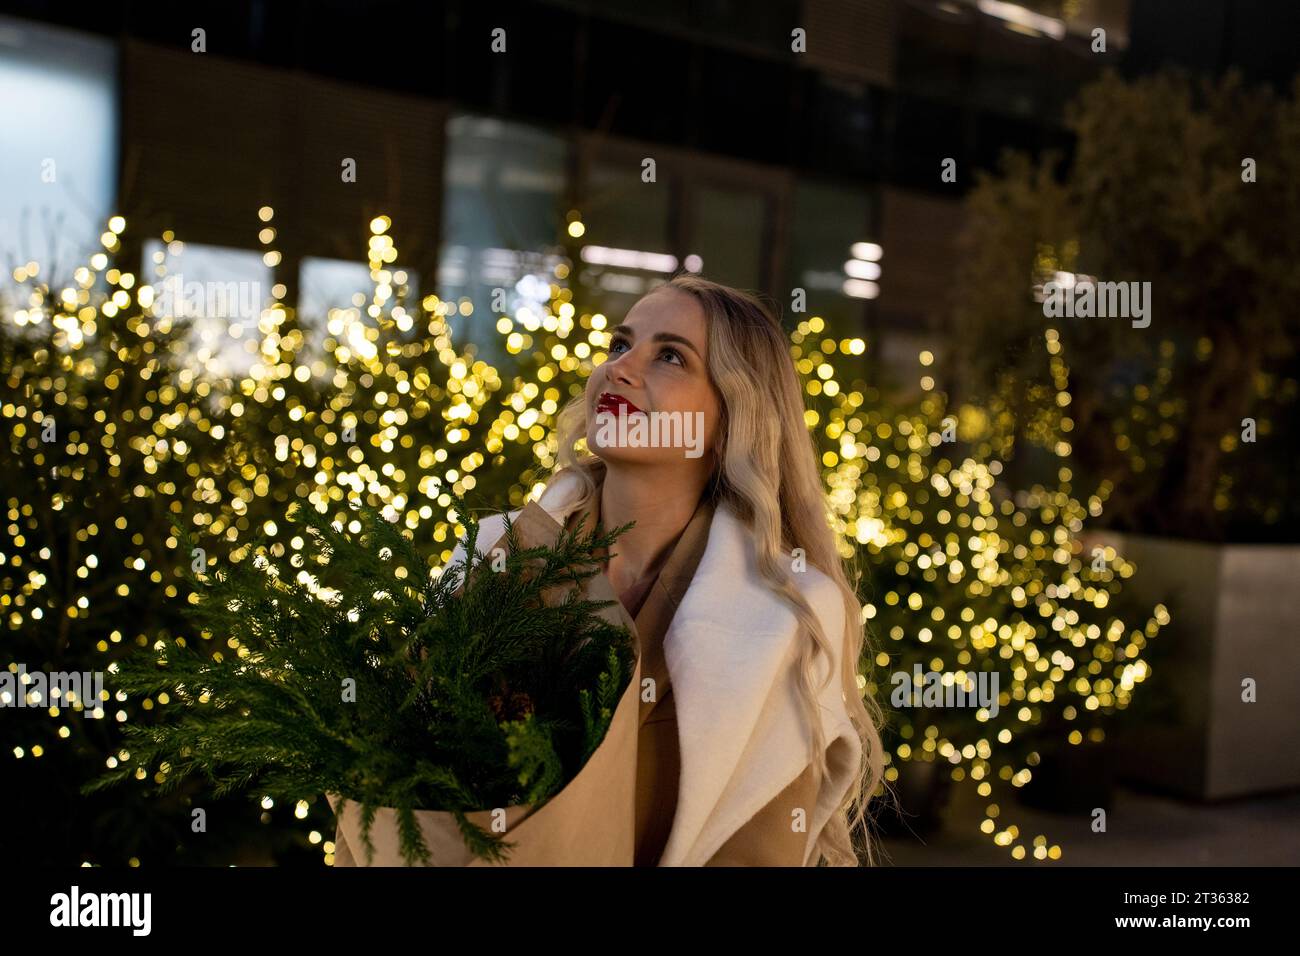 Smiling woman holding bouquet of plants near Christmas lights Stock Photo